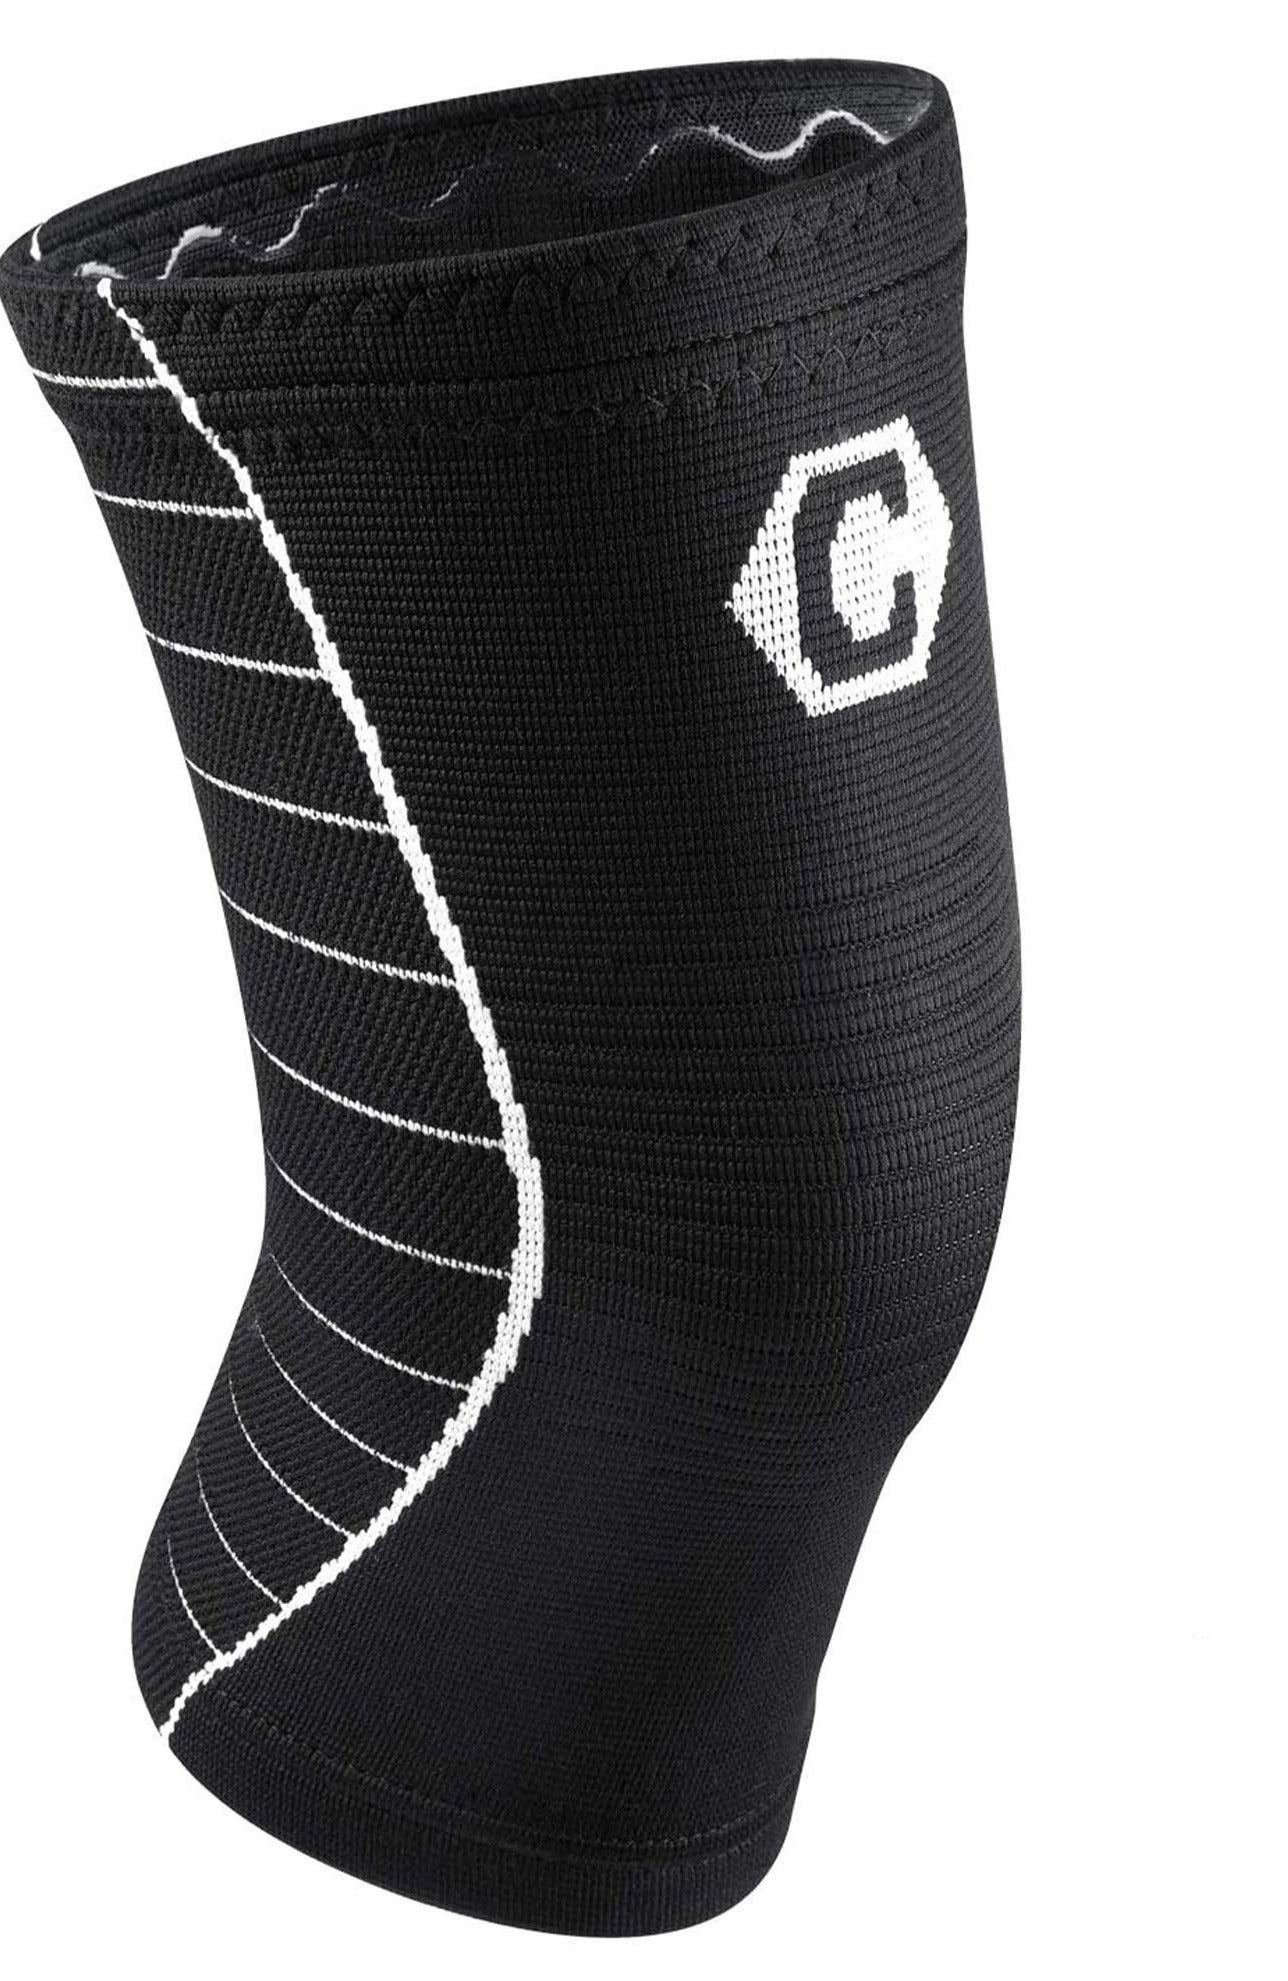 CAMBIVO  Knee Support Brace( single), Knee Compression Sleeve for Running, Arthritis, ACL, Meniscus Tear, Sports. ( S SIZE, Black) - e4cents